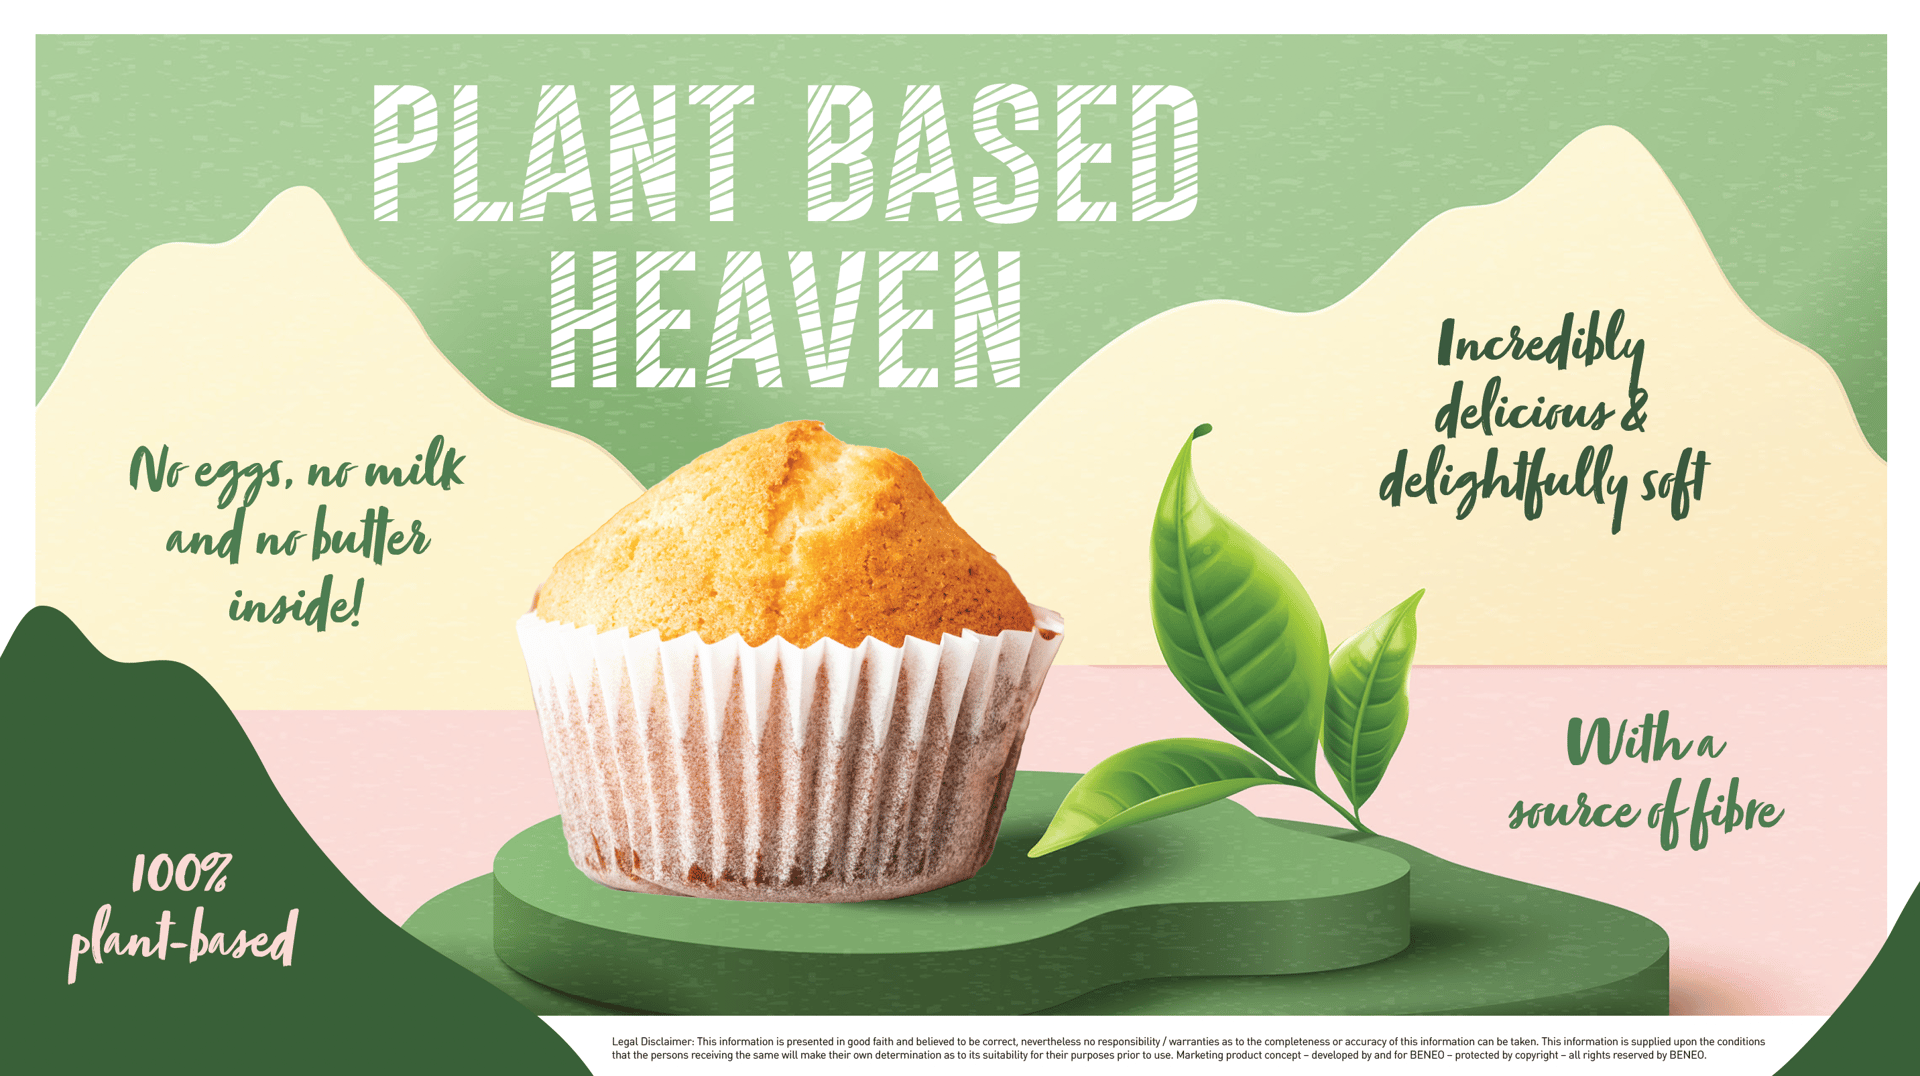 Plant-based muffin concept